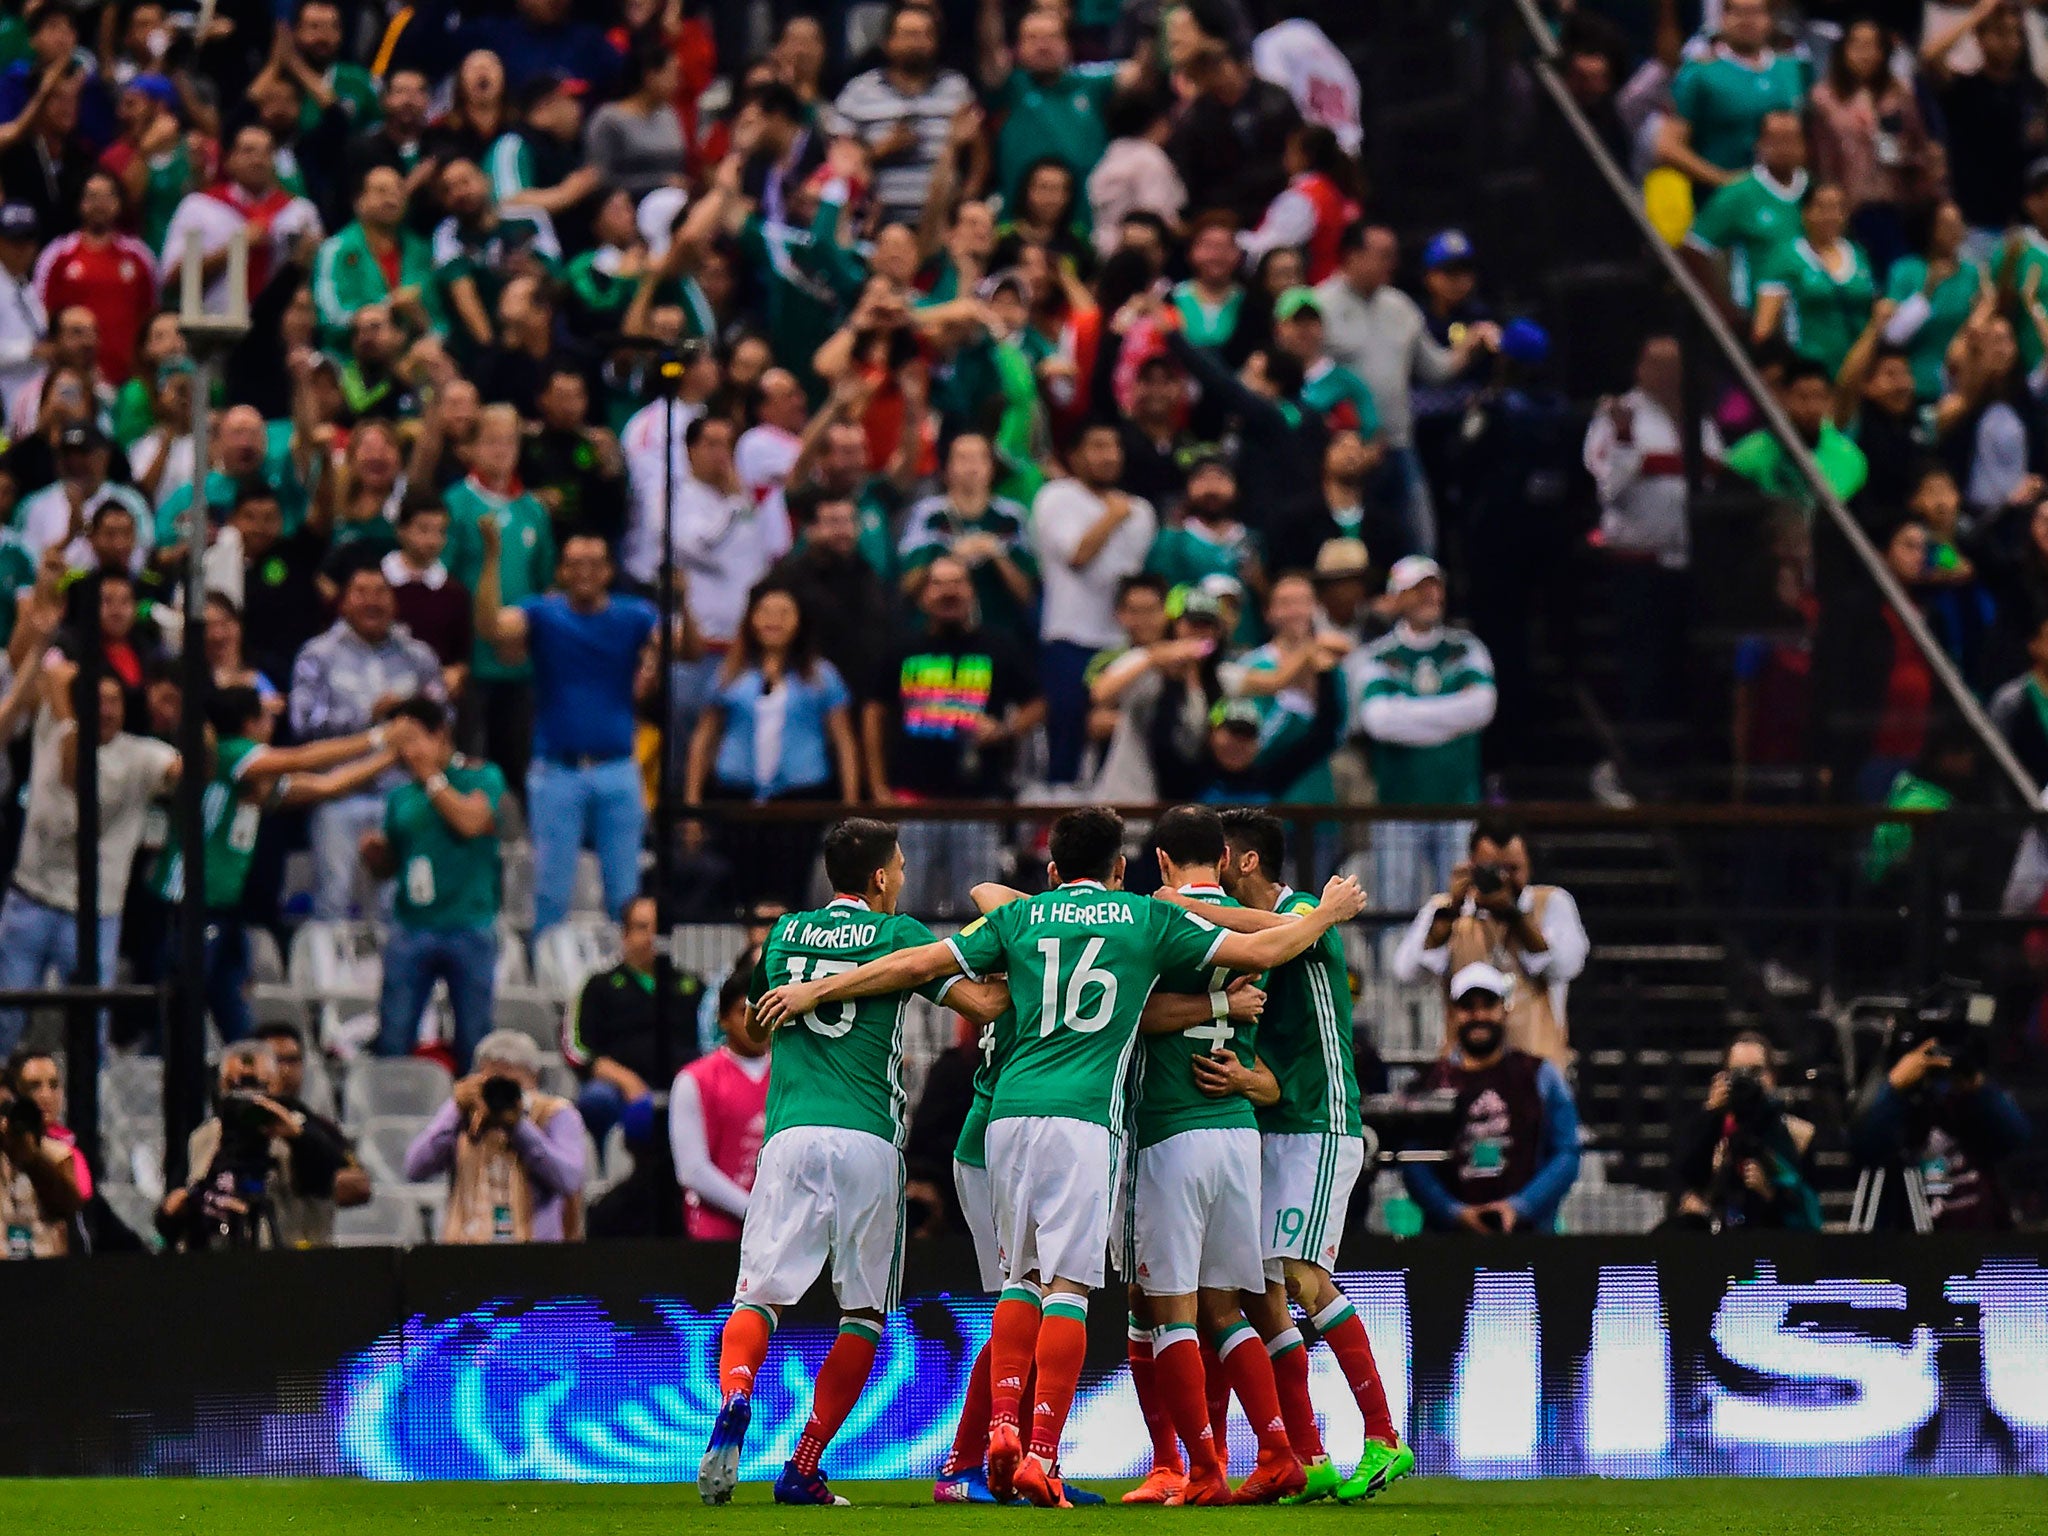 Mexican players celebrate a goal against Costa Rica during their 2018 FIFA World Cup qualifier football match in Mexico City on March 24, 2017